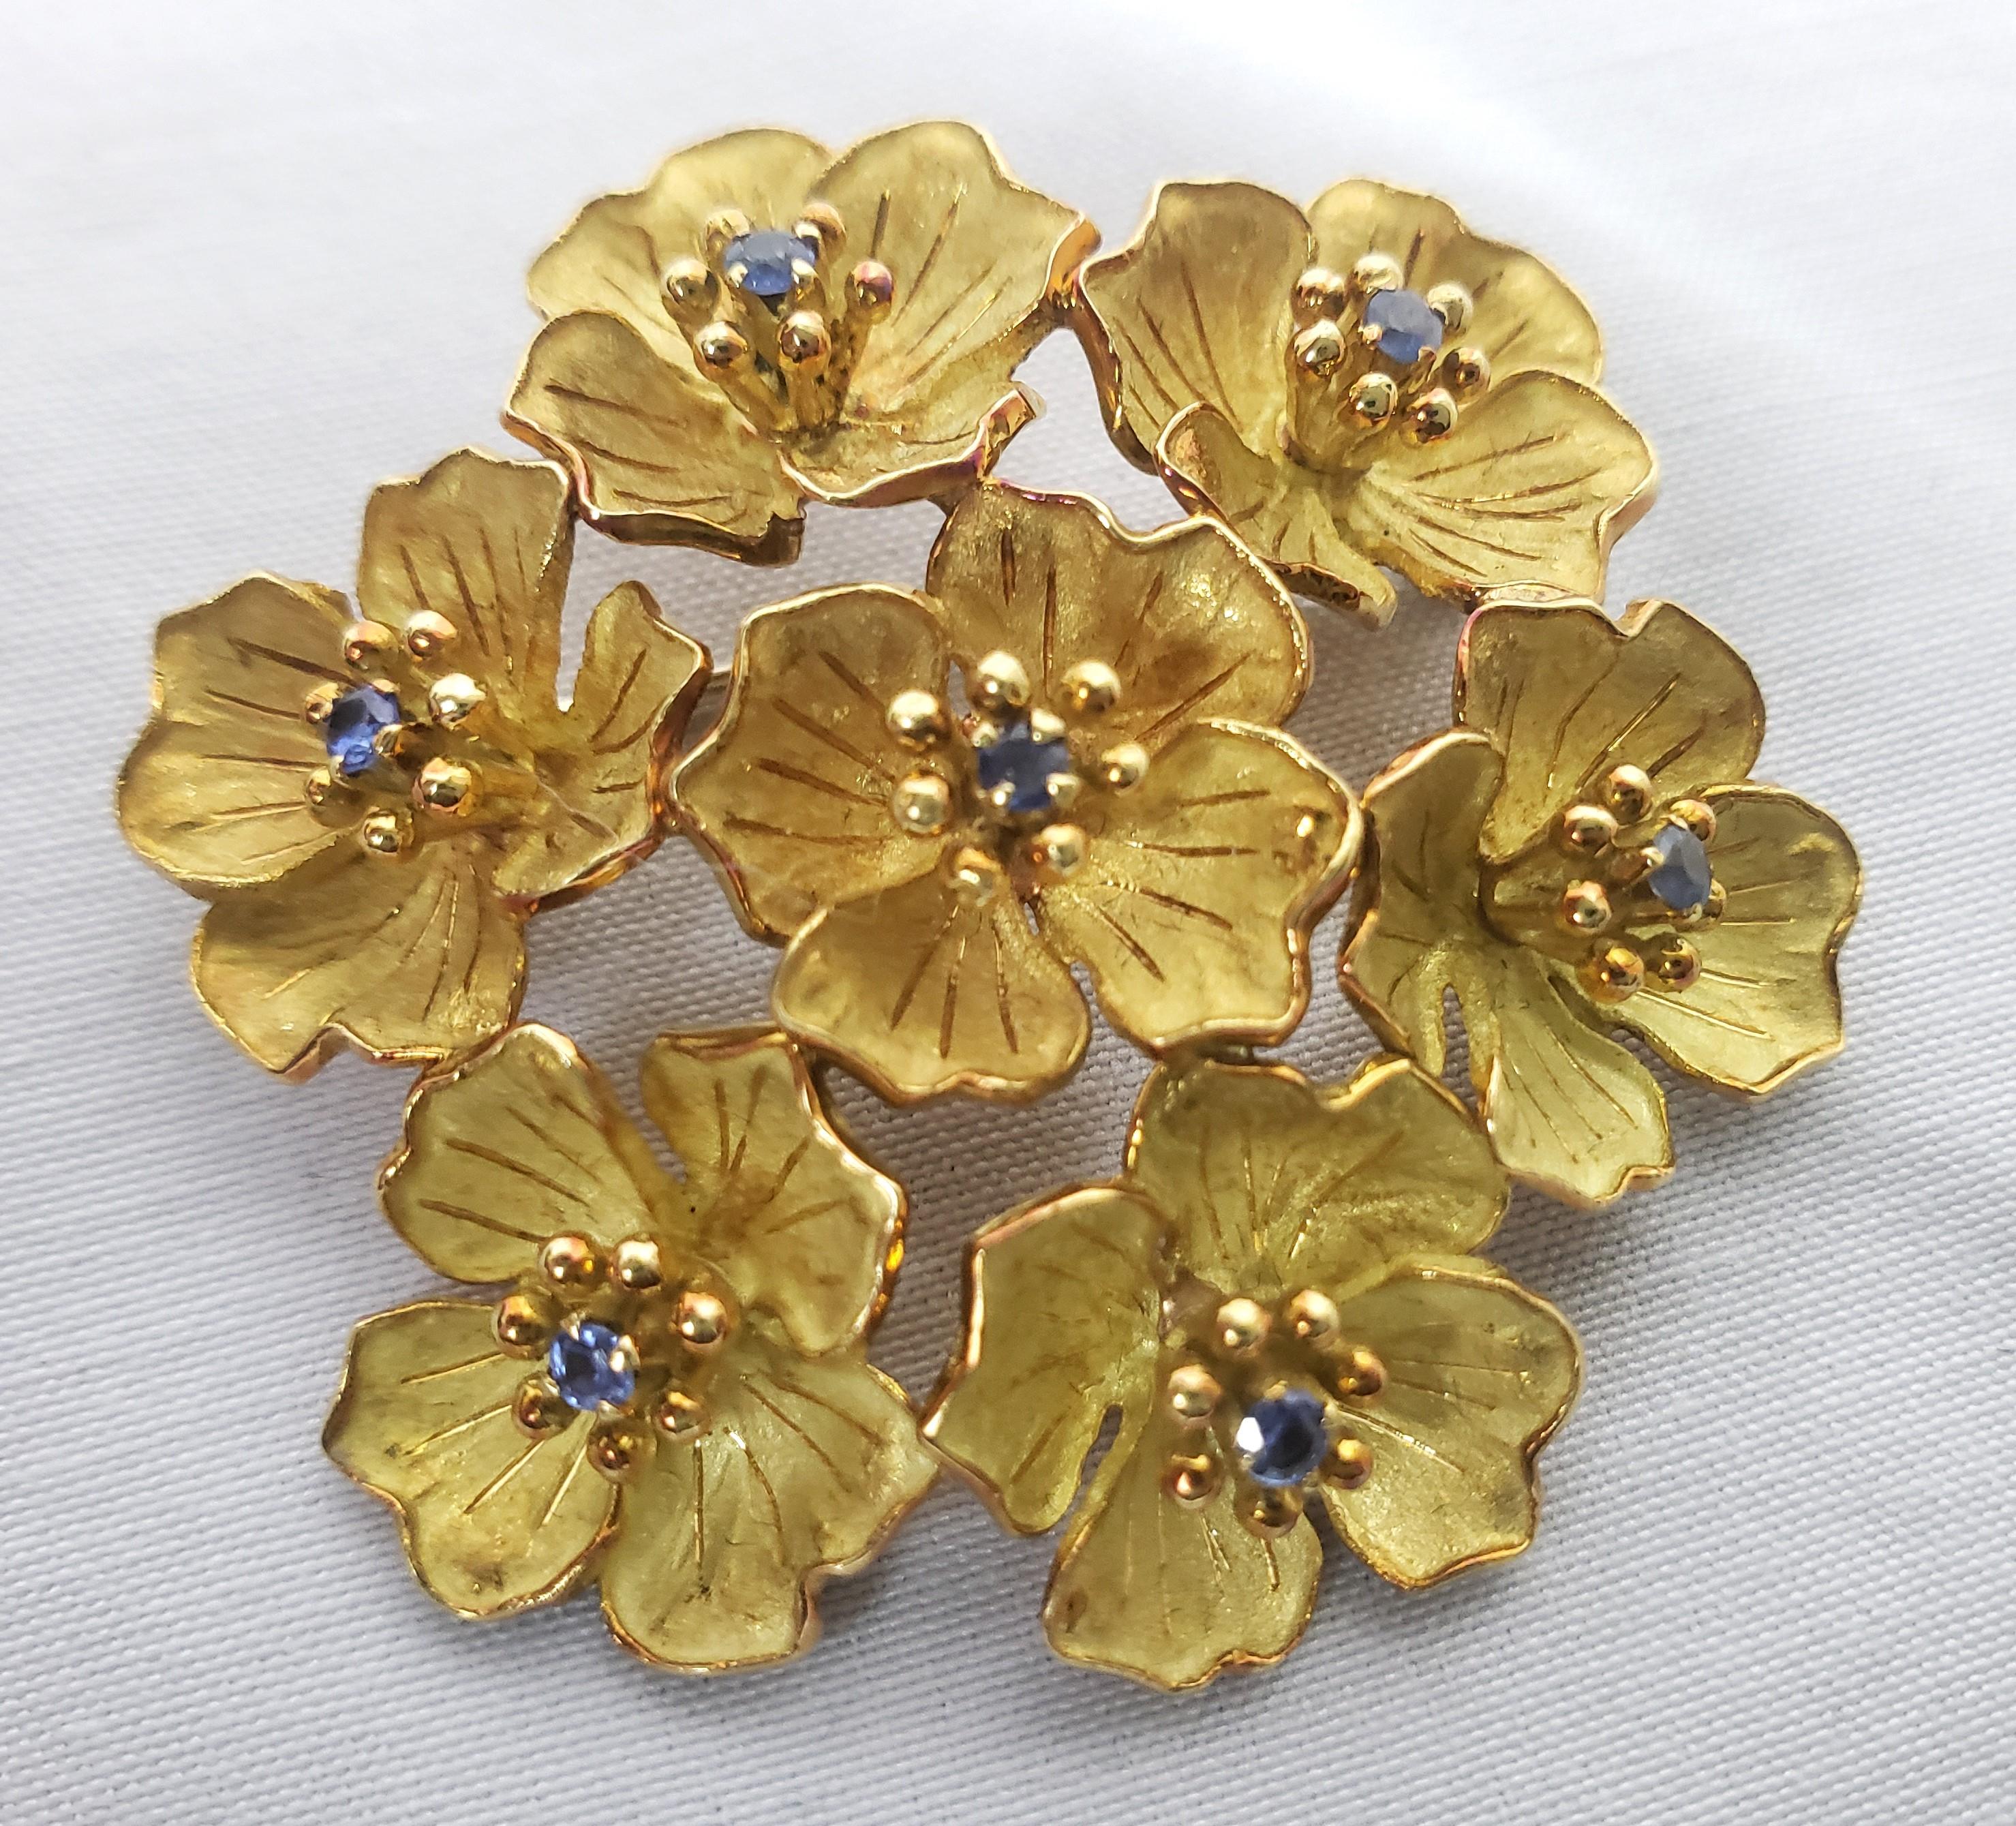 Antique Italian 18 Karat Yellow Gold & Saphire Floral Brooch & Earrings Set  In Good Condition For Sale In Hamilton, Ontario